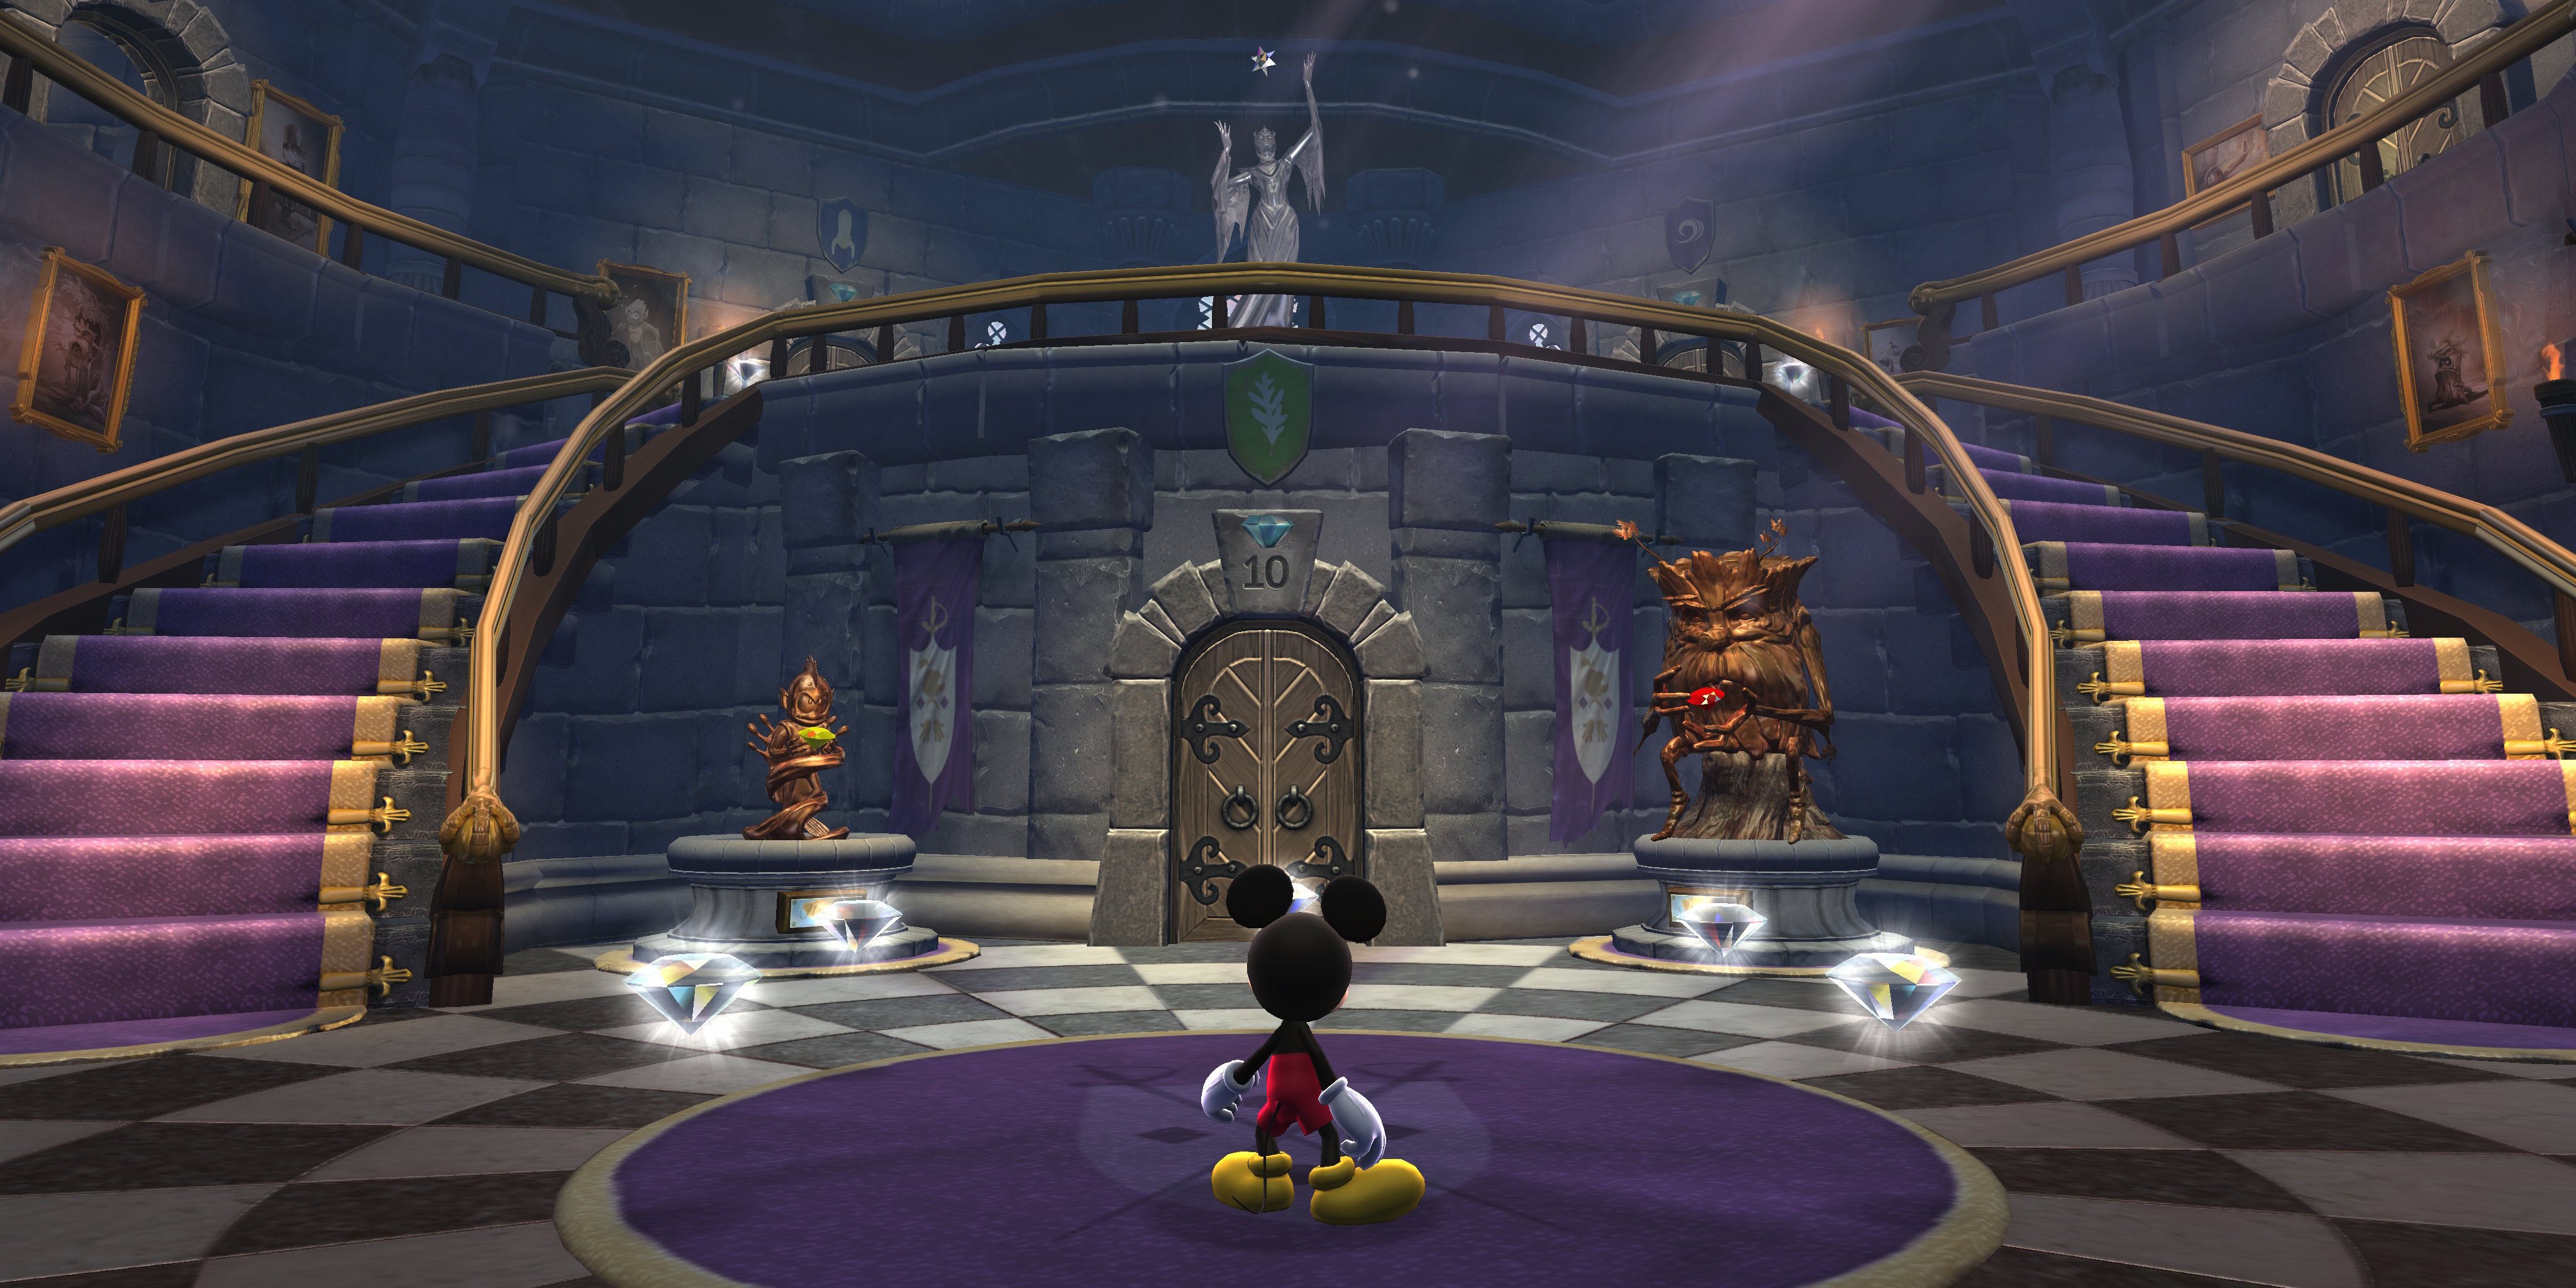 disney castle of illusion starring mickey mouse xbox